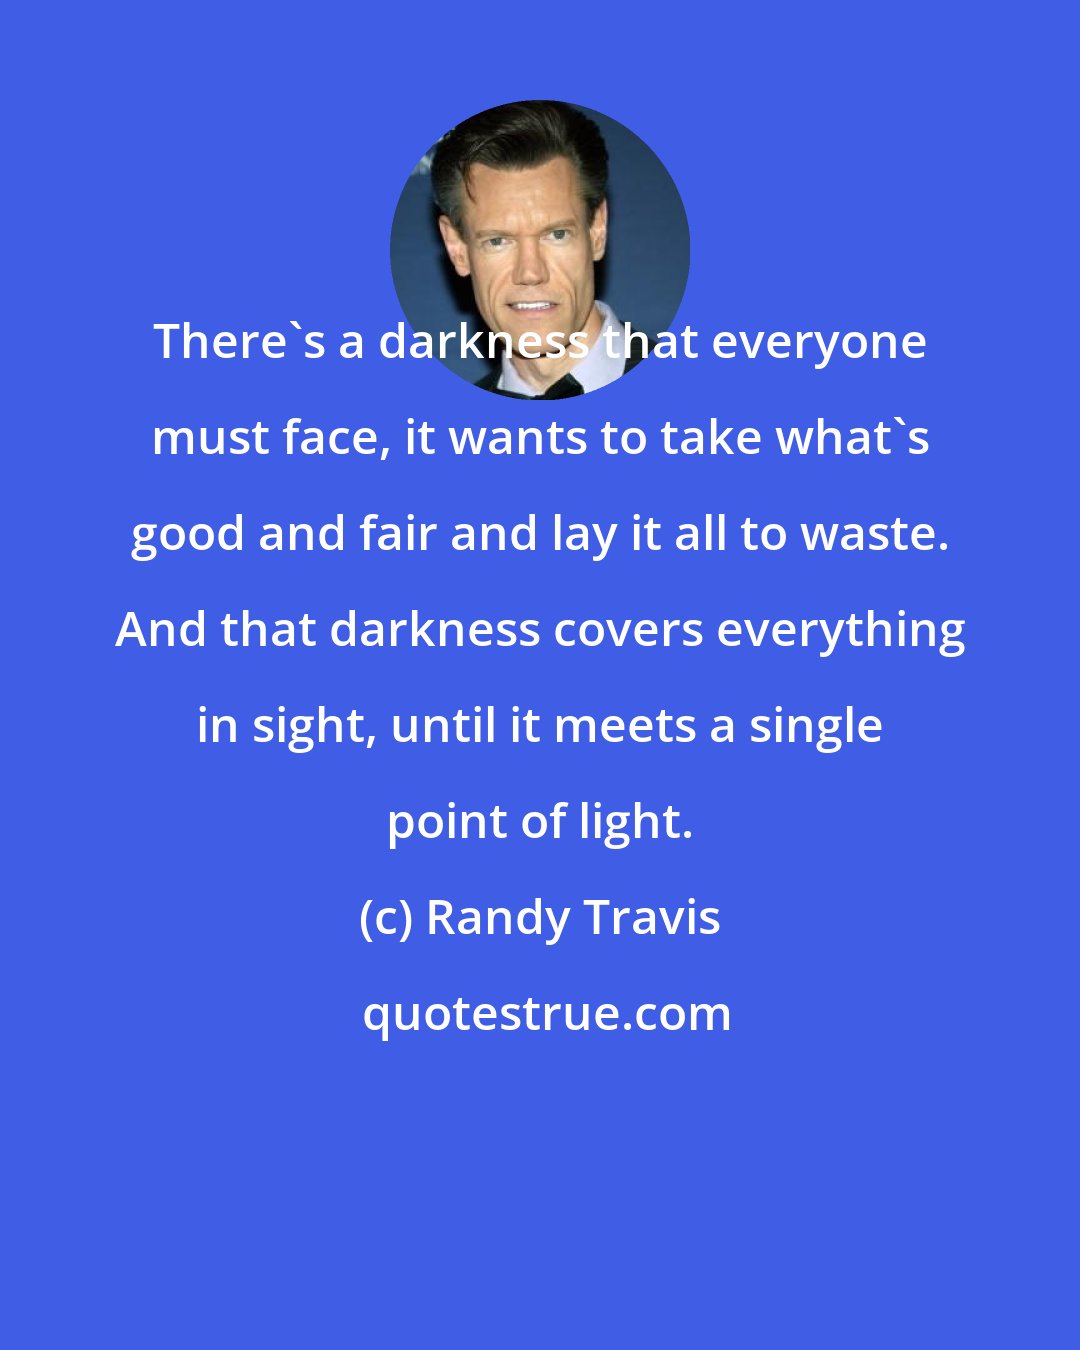 Randy Travis: There's a darkness that everyone must face, it wants to take what's good and fair and lay it all to waste. And that darkness covers everything in sight, until it meets a single point of light.